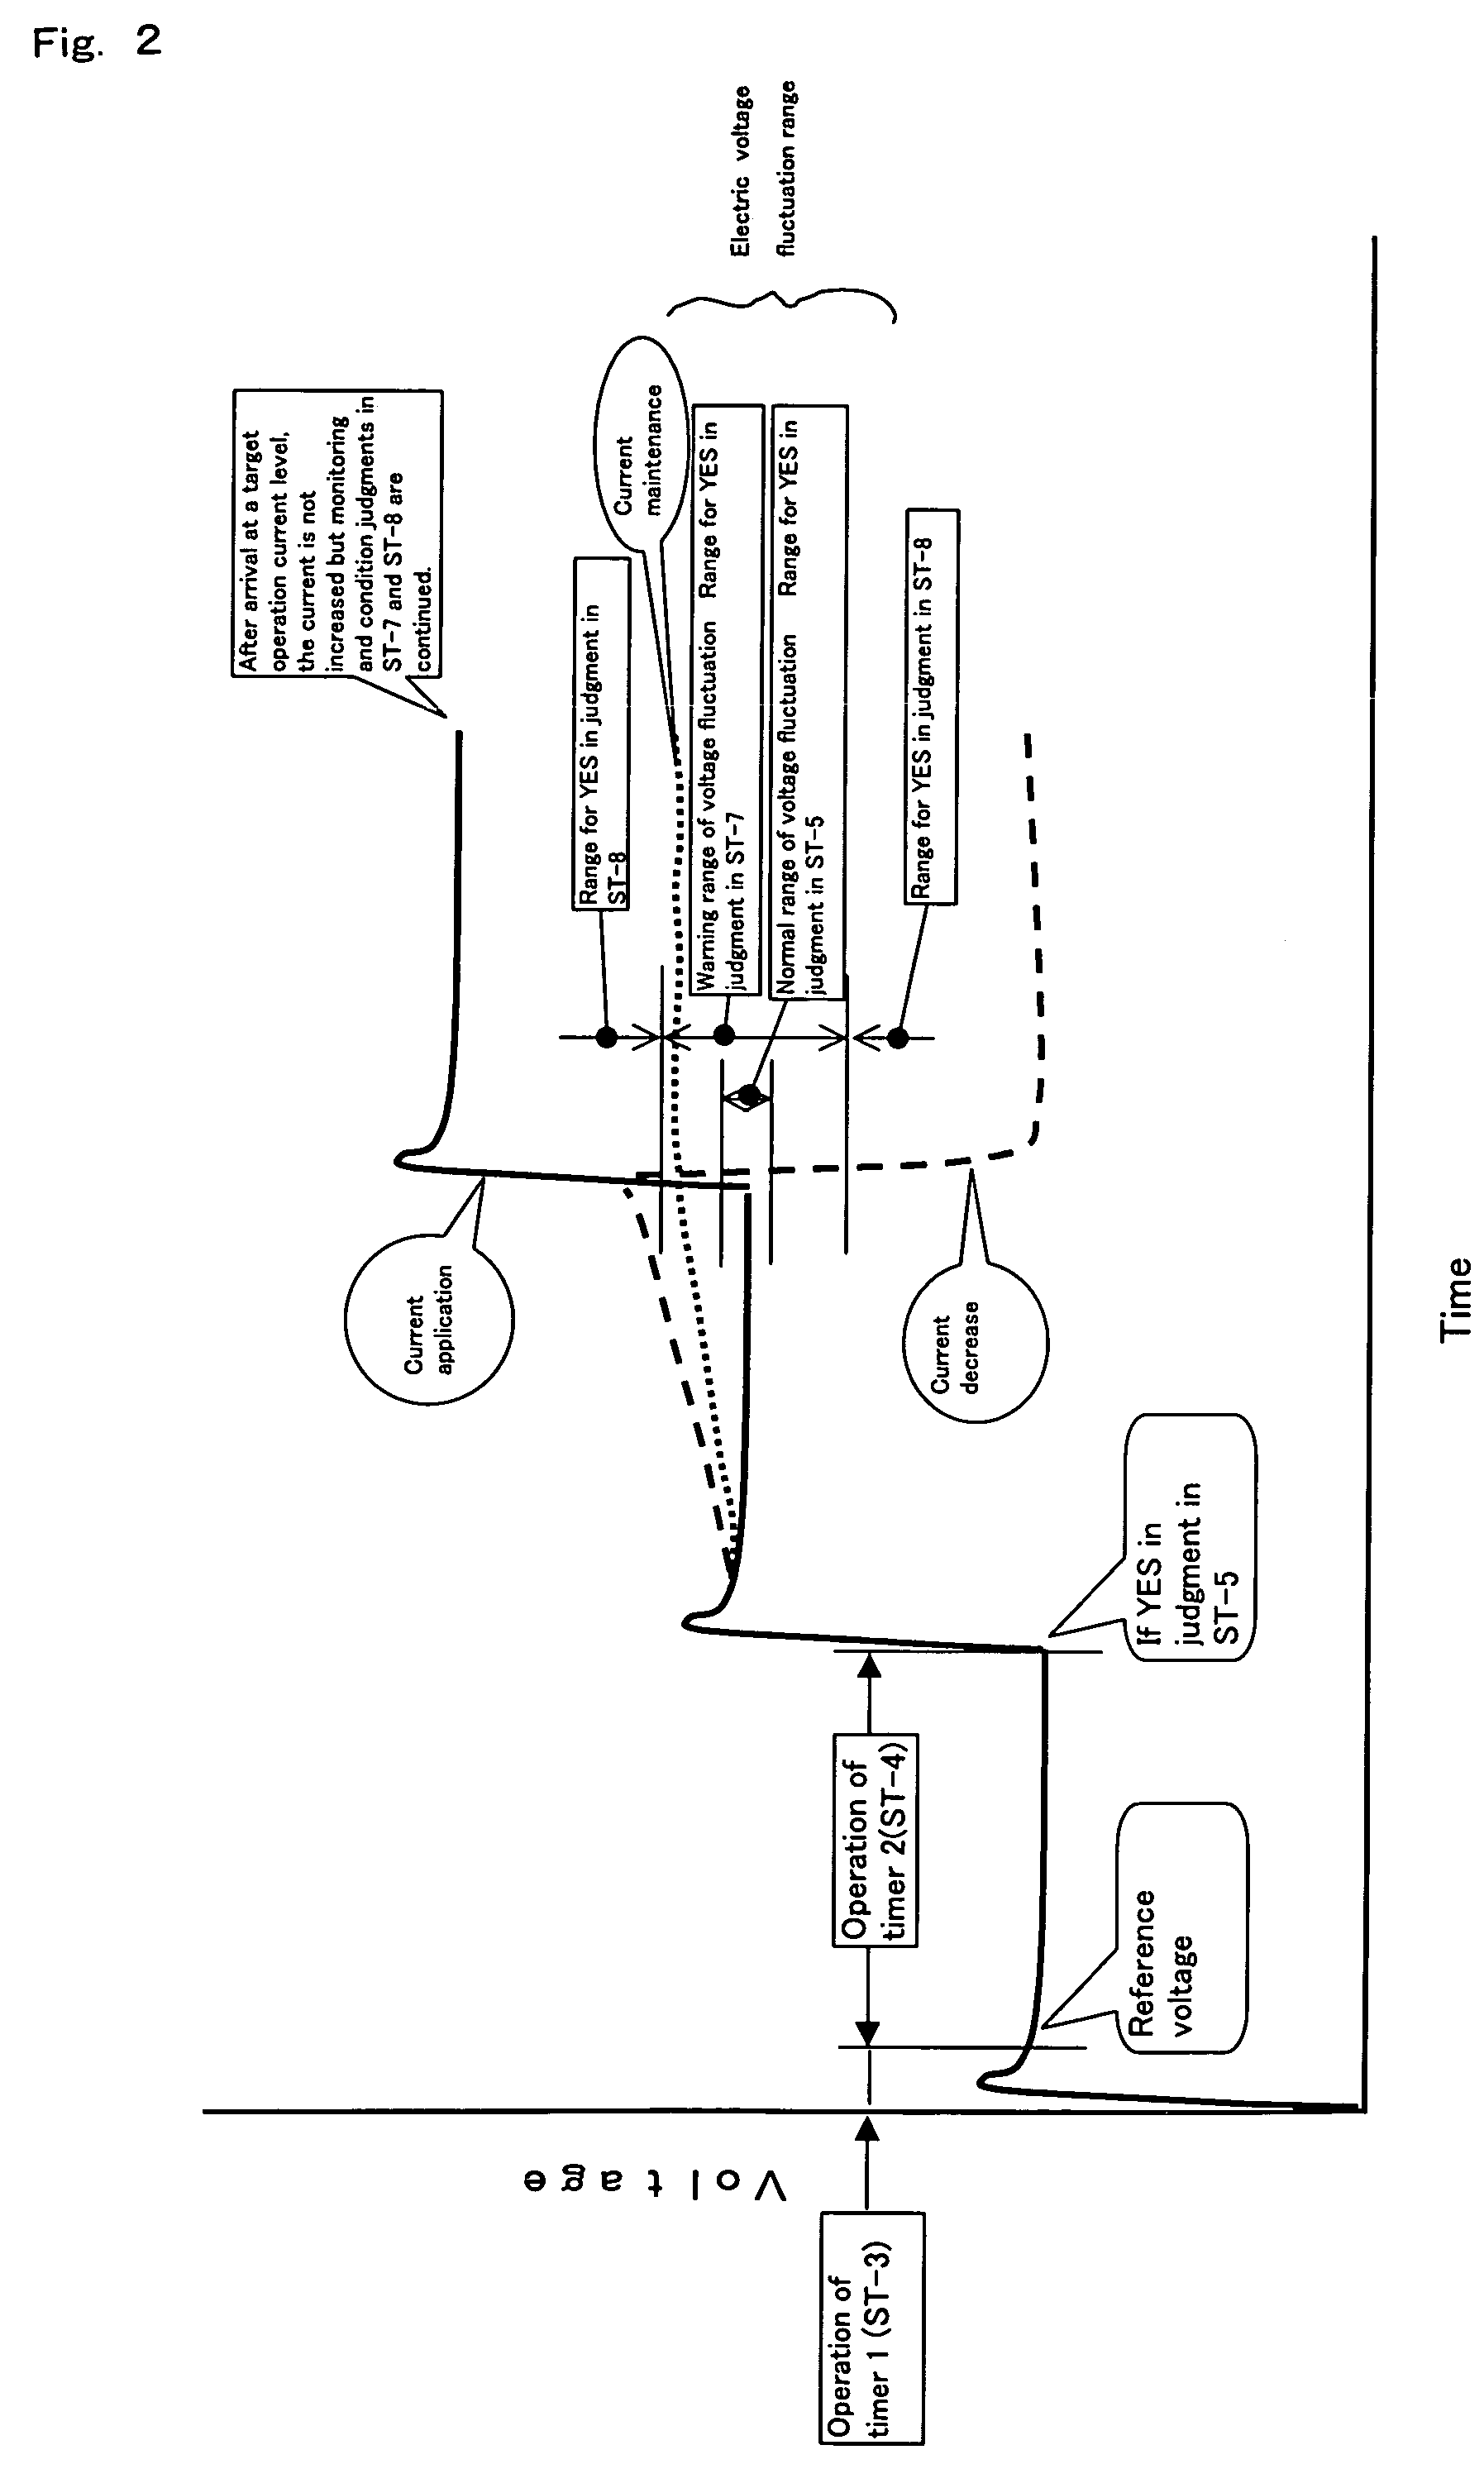 Electric current control method and apparatus for use in gas generators